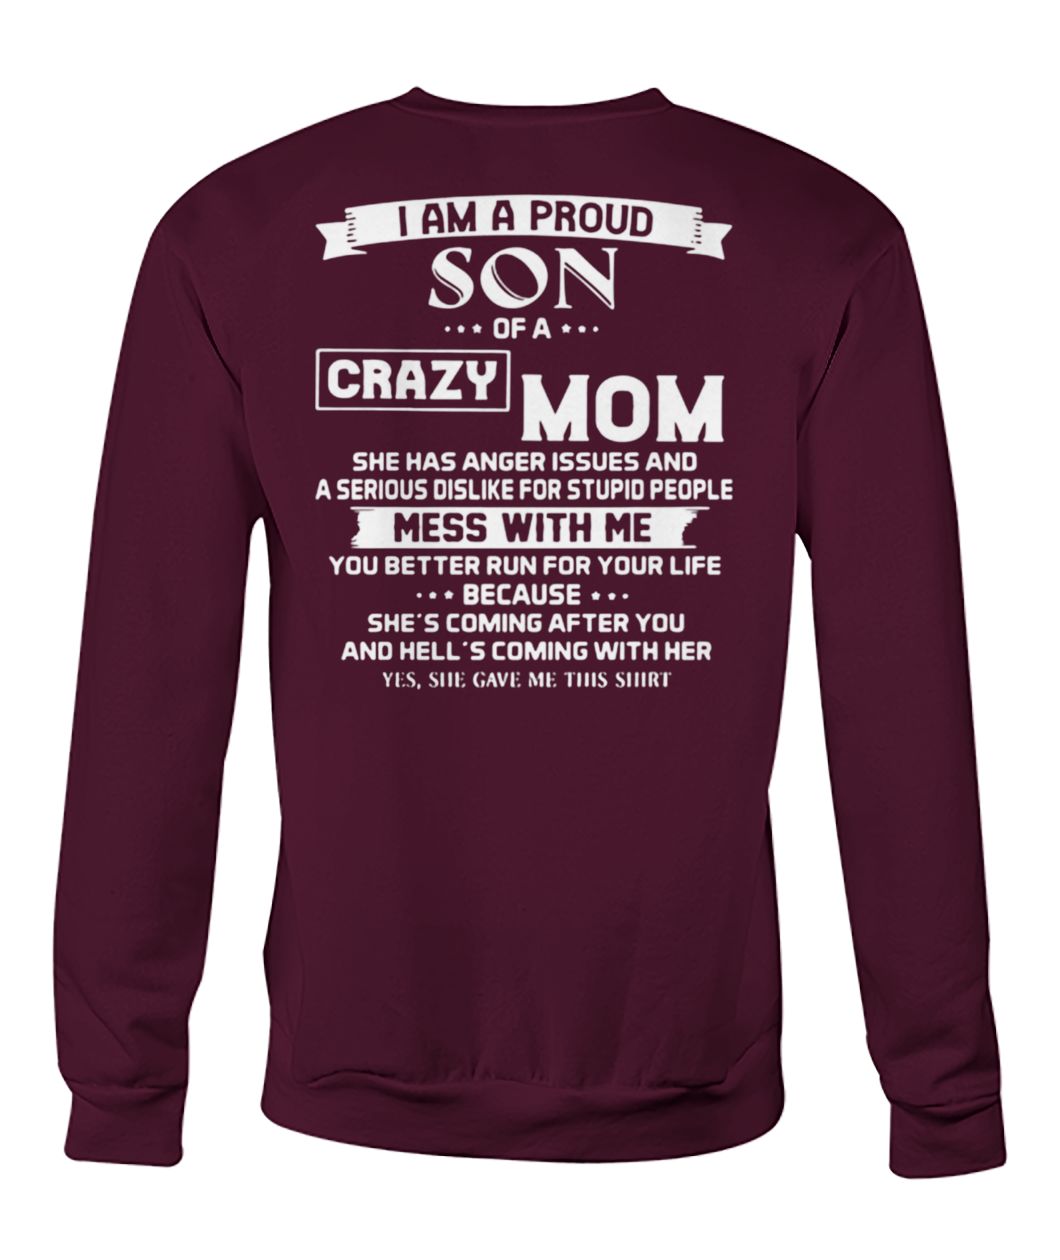 I am a proud son of a crazy mom mess with me you better run for your life crew neck sweatshirt